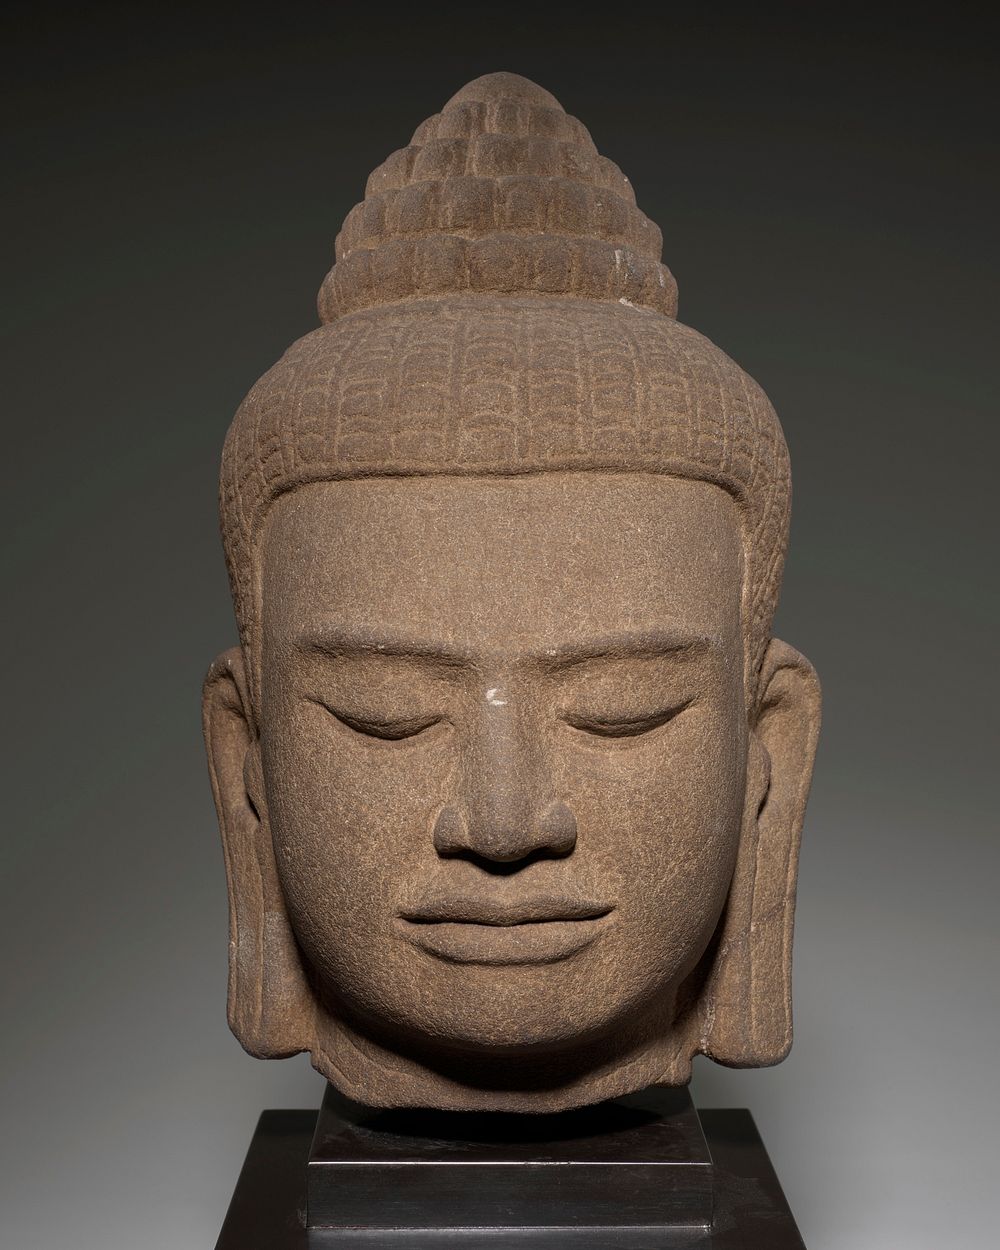 Head of the Buddha. Original from the Minneapolis Institute of Art.